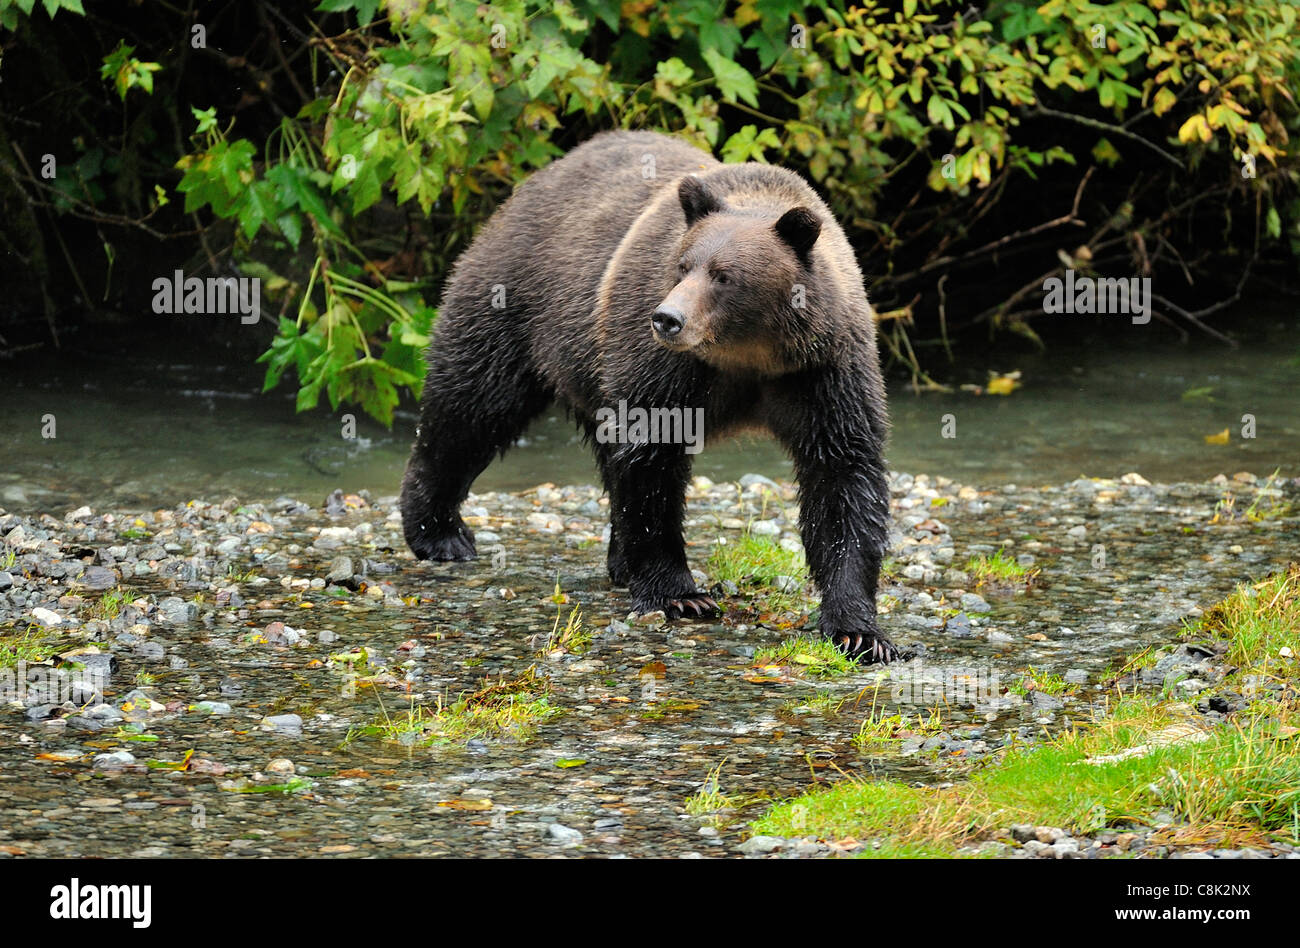 An adult grizzly bear walking while looking upstream alert and wary of approaching danger Stock Photo